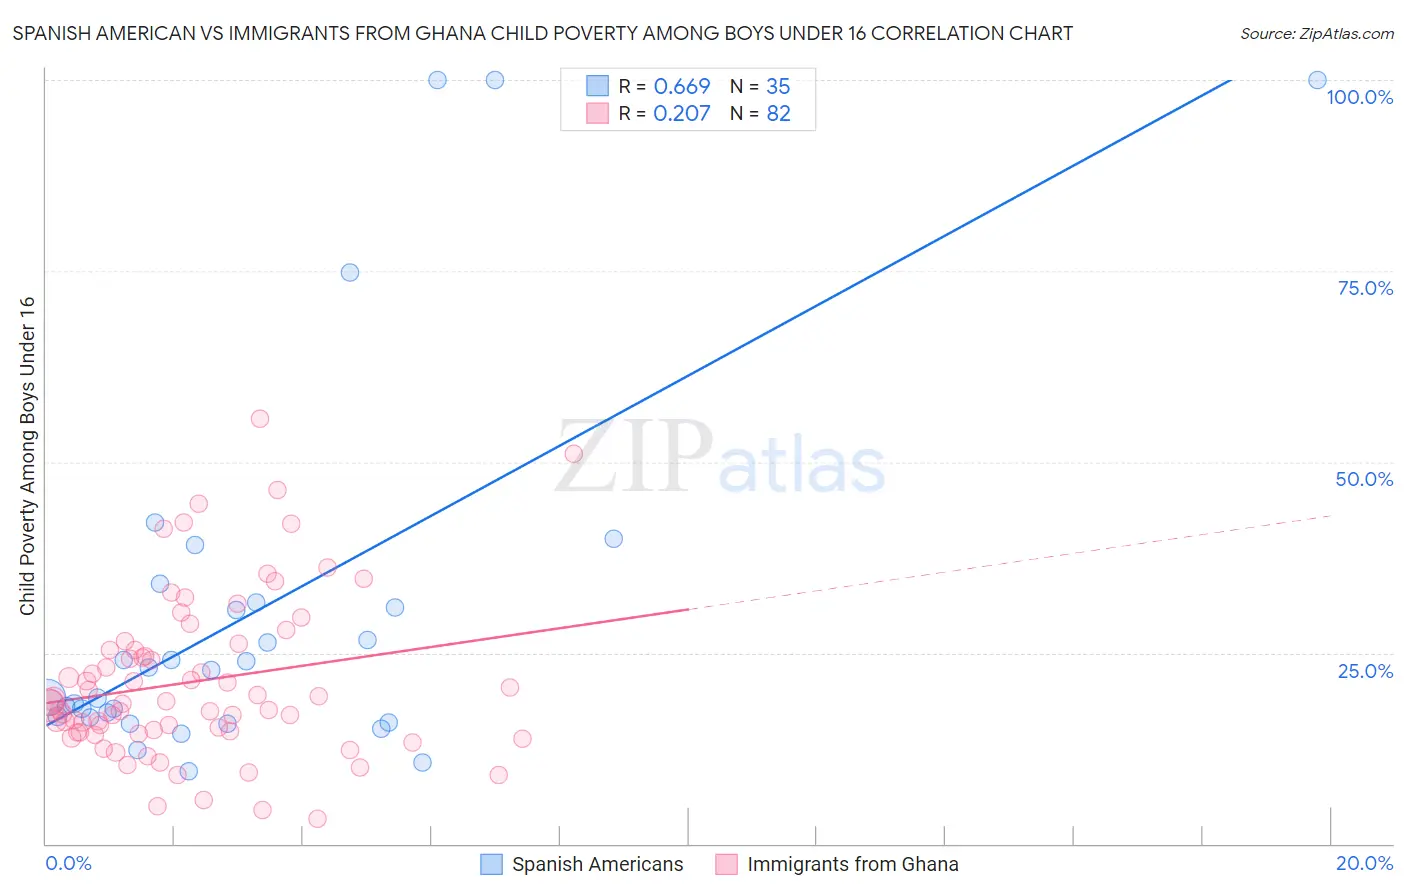 Spanish American vs Immigrants from Ghana Child Poverty Among Boys Under 16